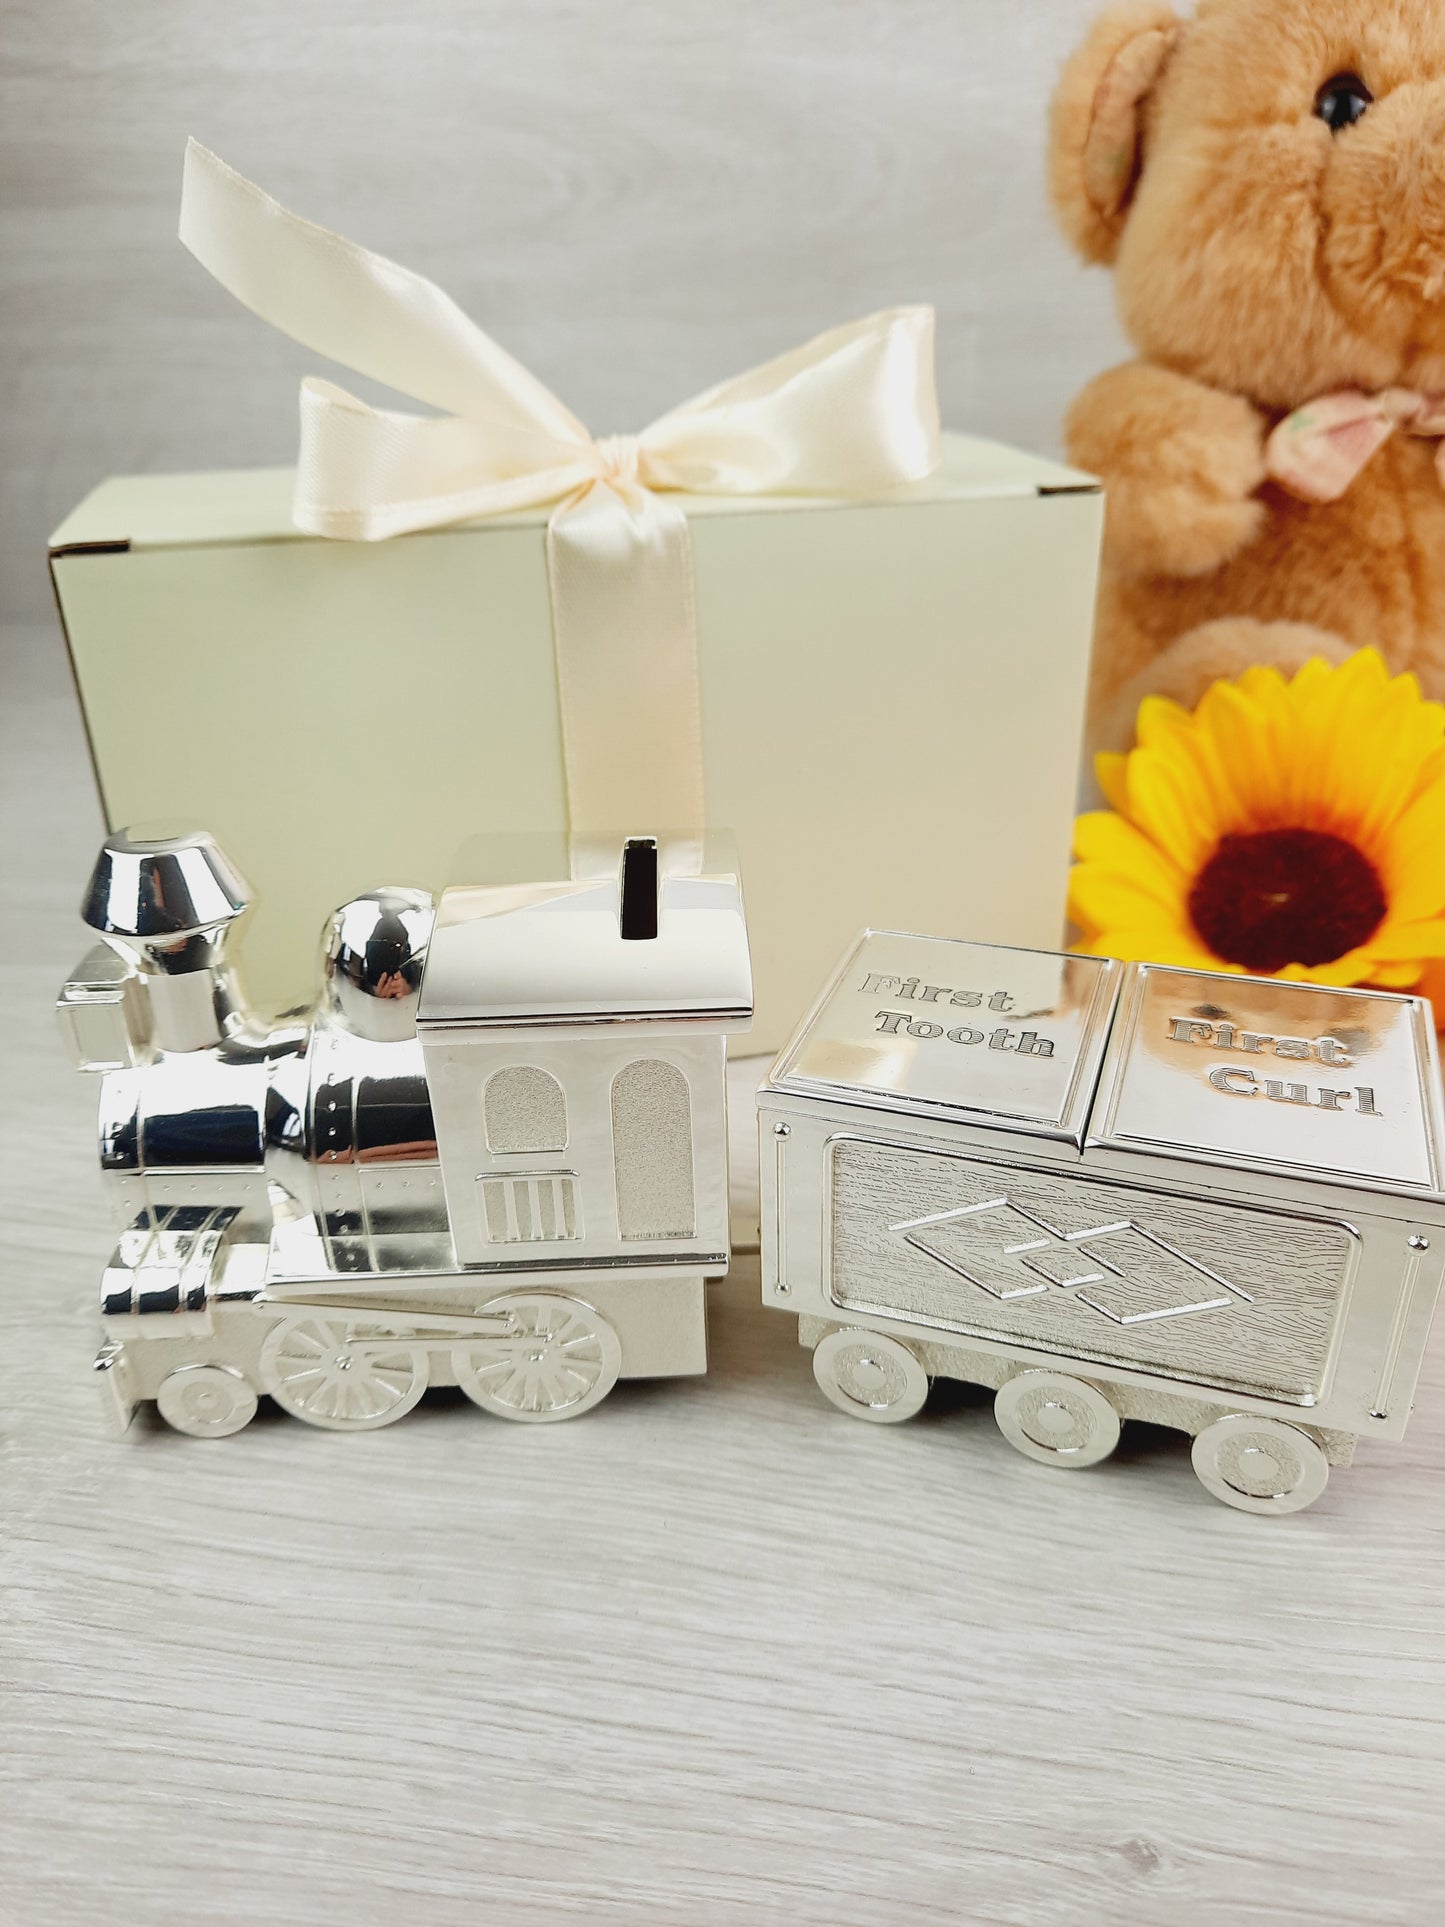 Personalised Engraved Money Box with Baby Tooth and Curl Train. There's a cream gift box with peach ribbon, a sunflower and brown teddy bear as props.